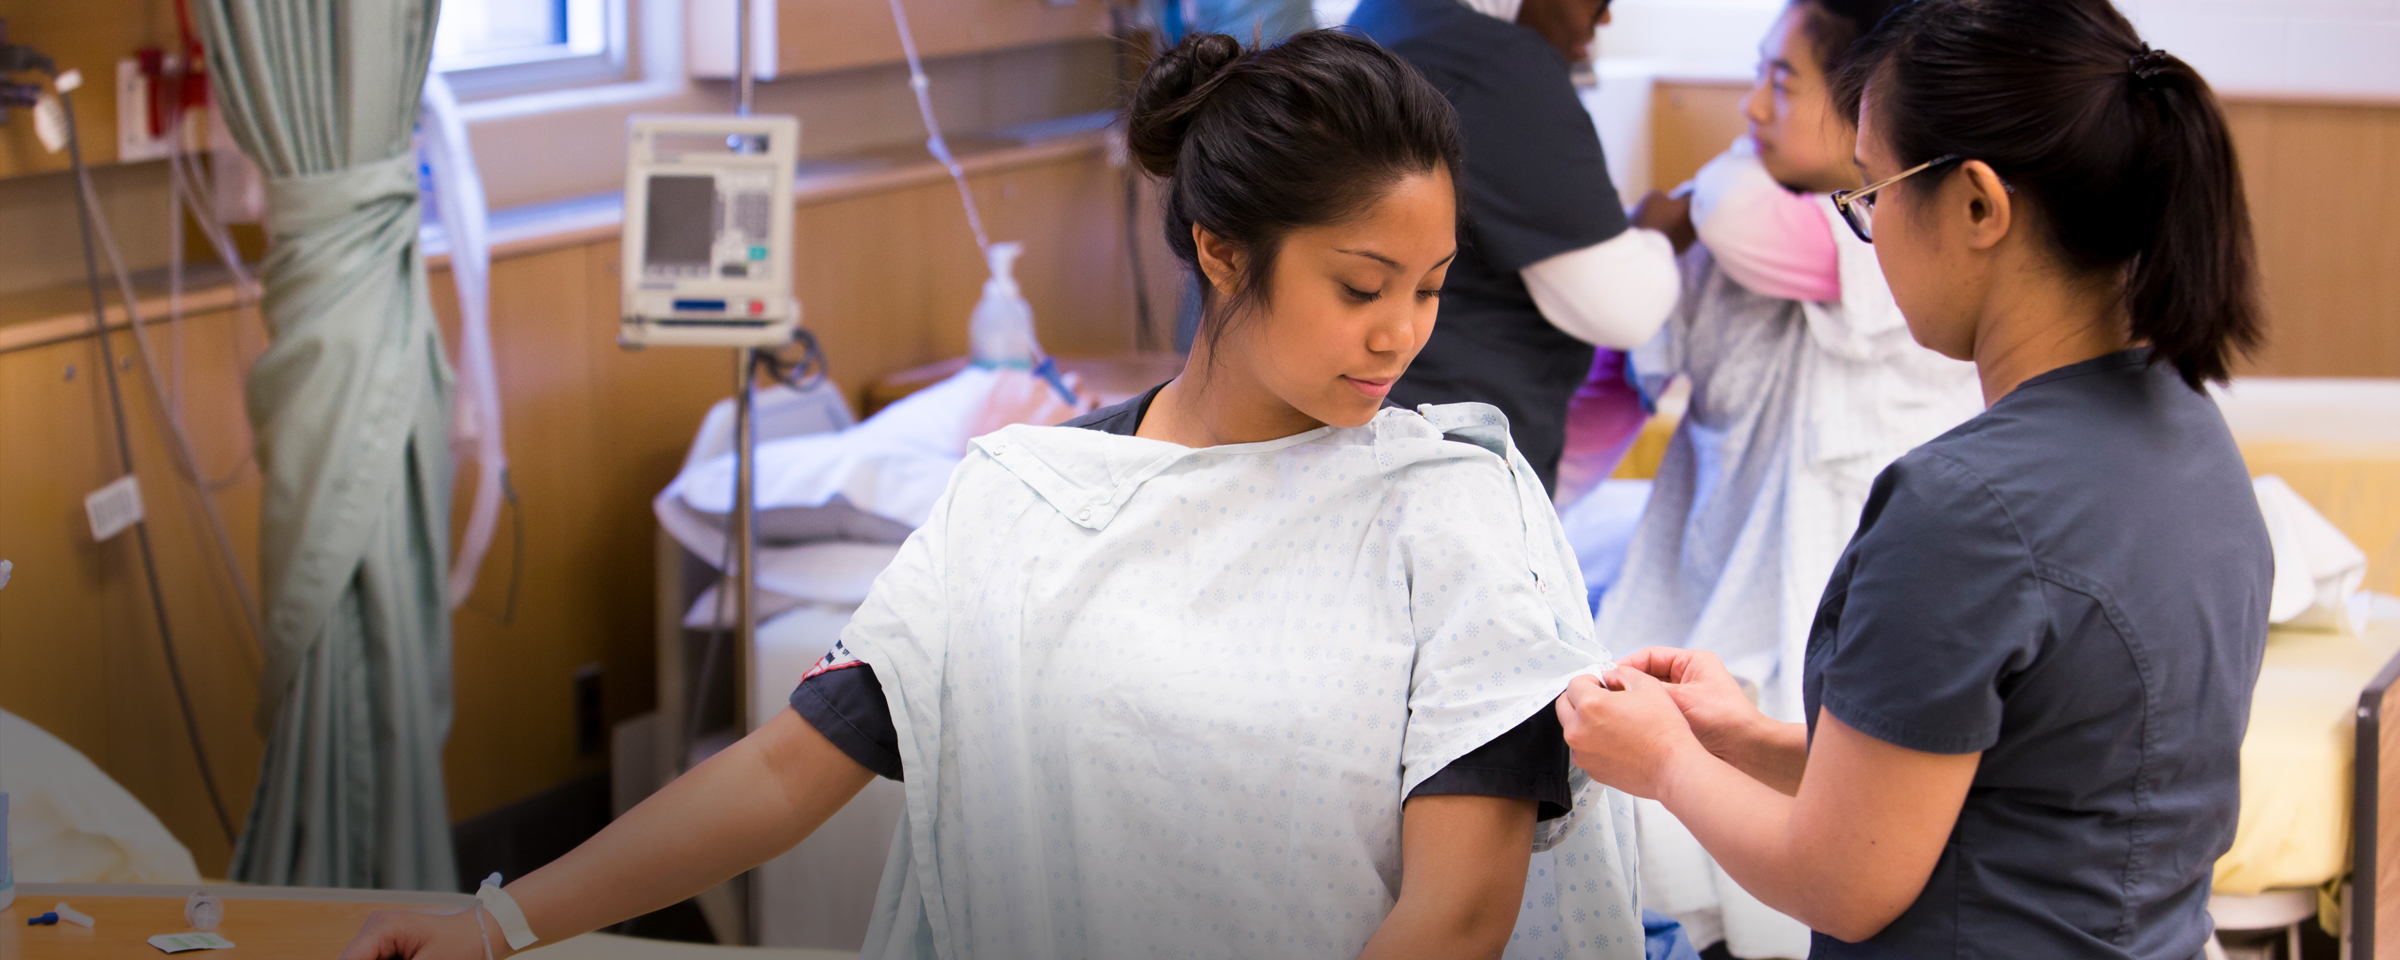 Nursing student assisting patient with gown